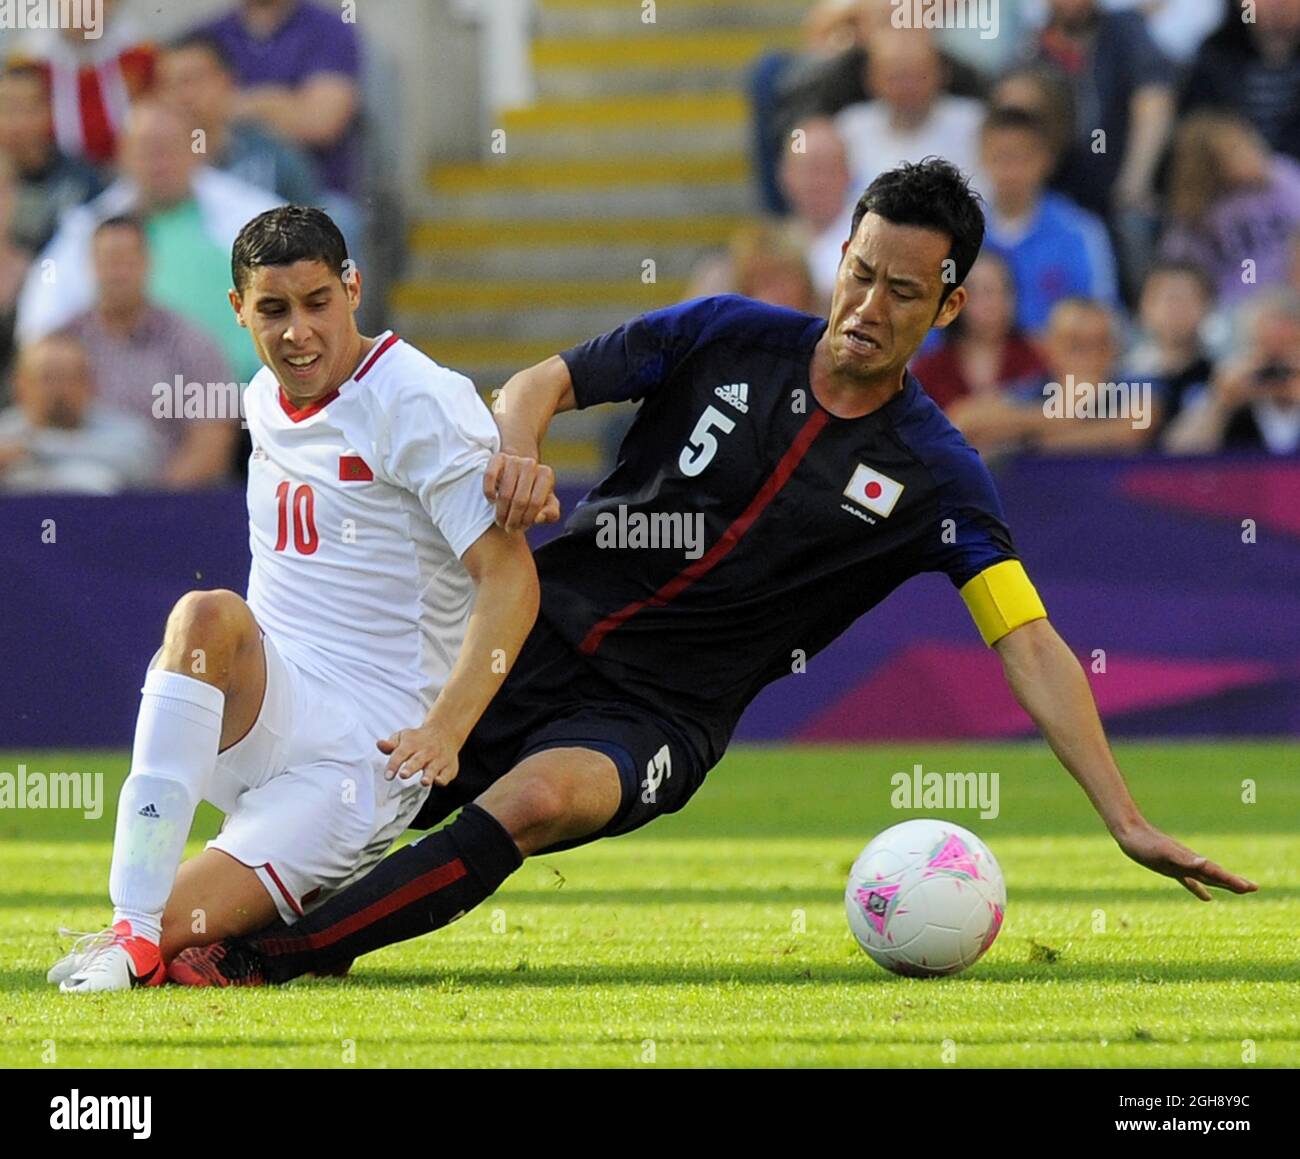 Morocco's Abdelaziz Barrada (L) and Japan's Maya Yoshida during the London Olympic 2012 Group D men's match between Japan v Morocco at the St. James' Park, Newcastle upon Tyne on the 29th July 2012. Stock Photo